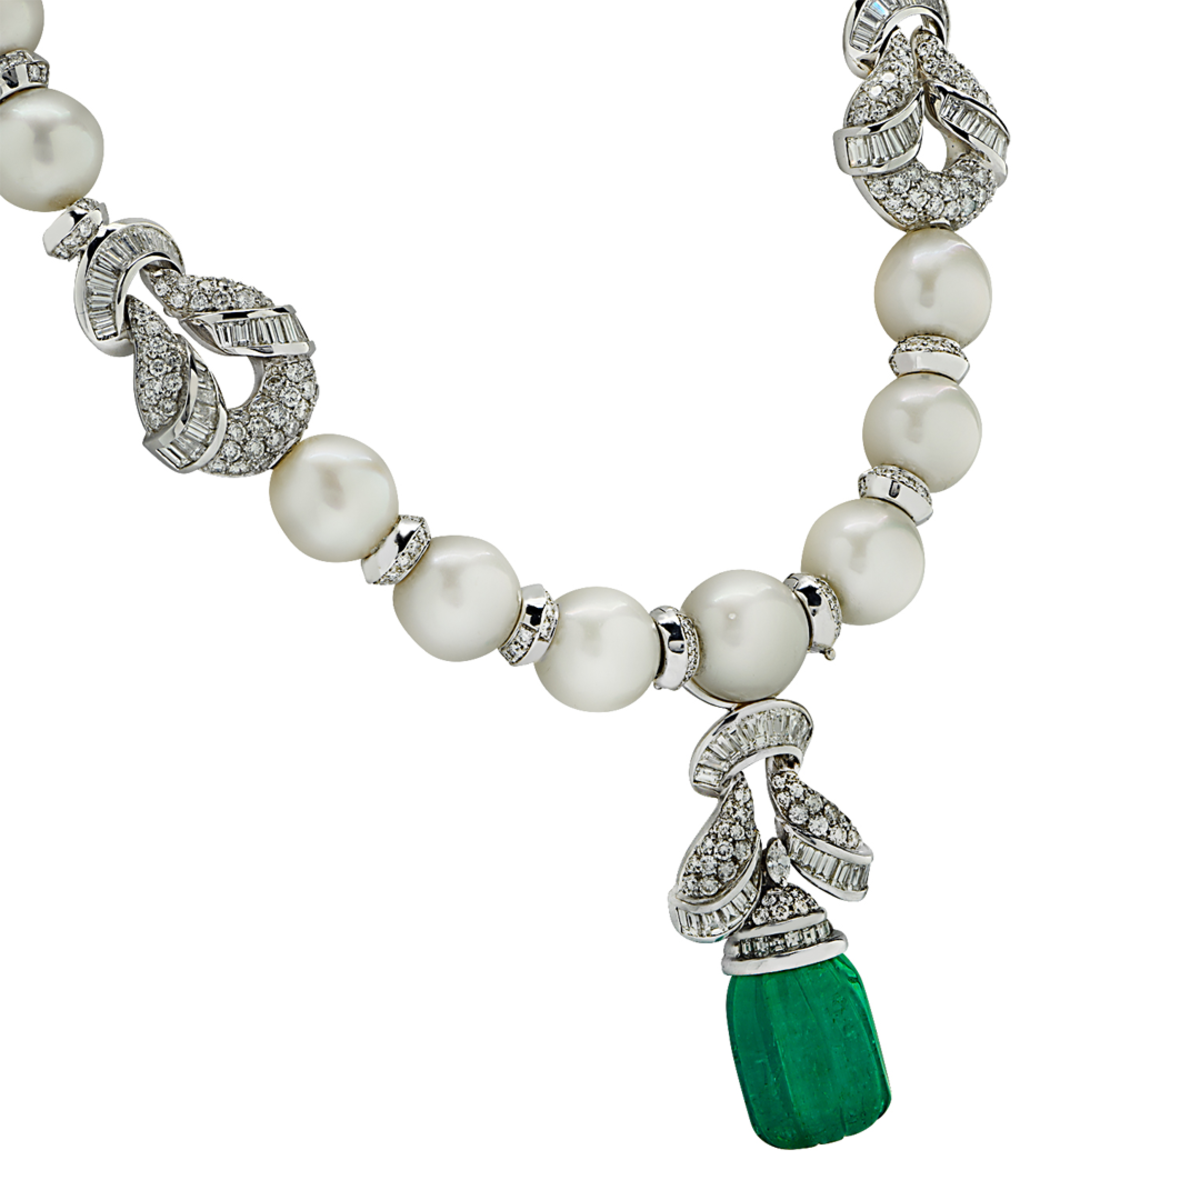 Piranesi Italy 1980s Platinum Emerald, Diamond & Cultured Pearl Necklace front view